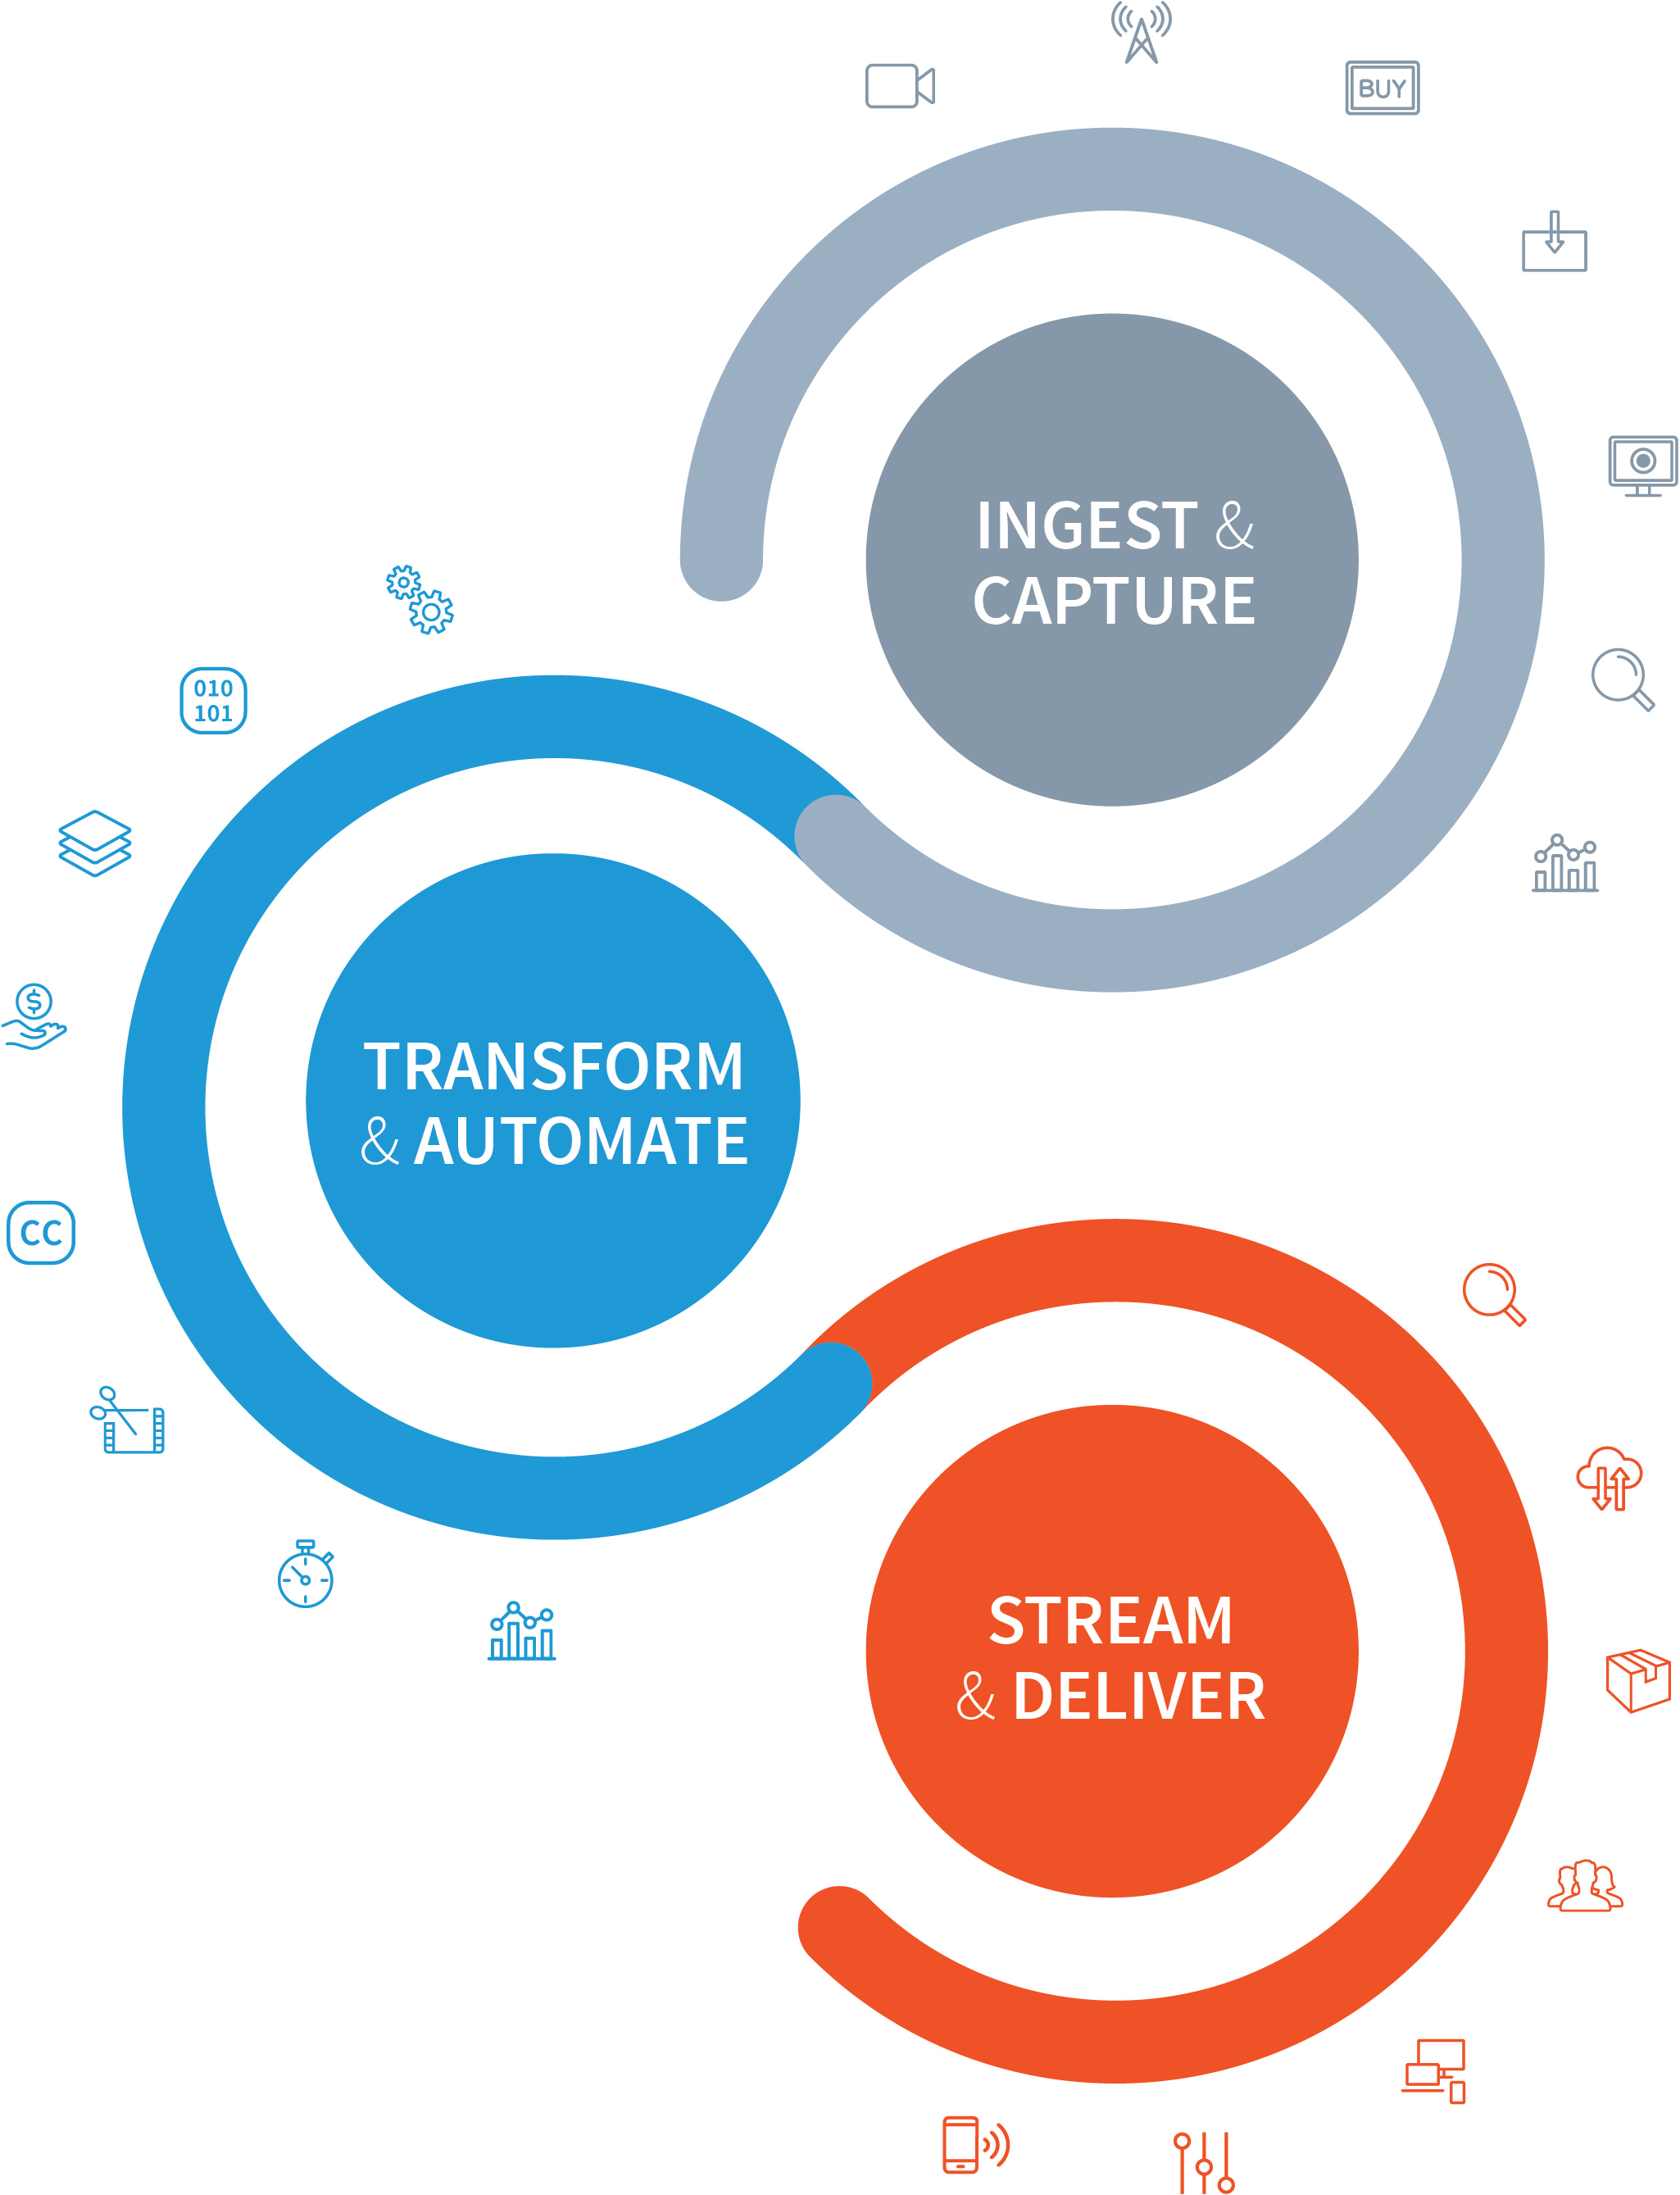 Telestream Unveils Unique Workflows and Processes that Ensure Video Quality from Creation to Delivery at NAB 2018 - February 8, 2018